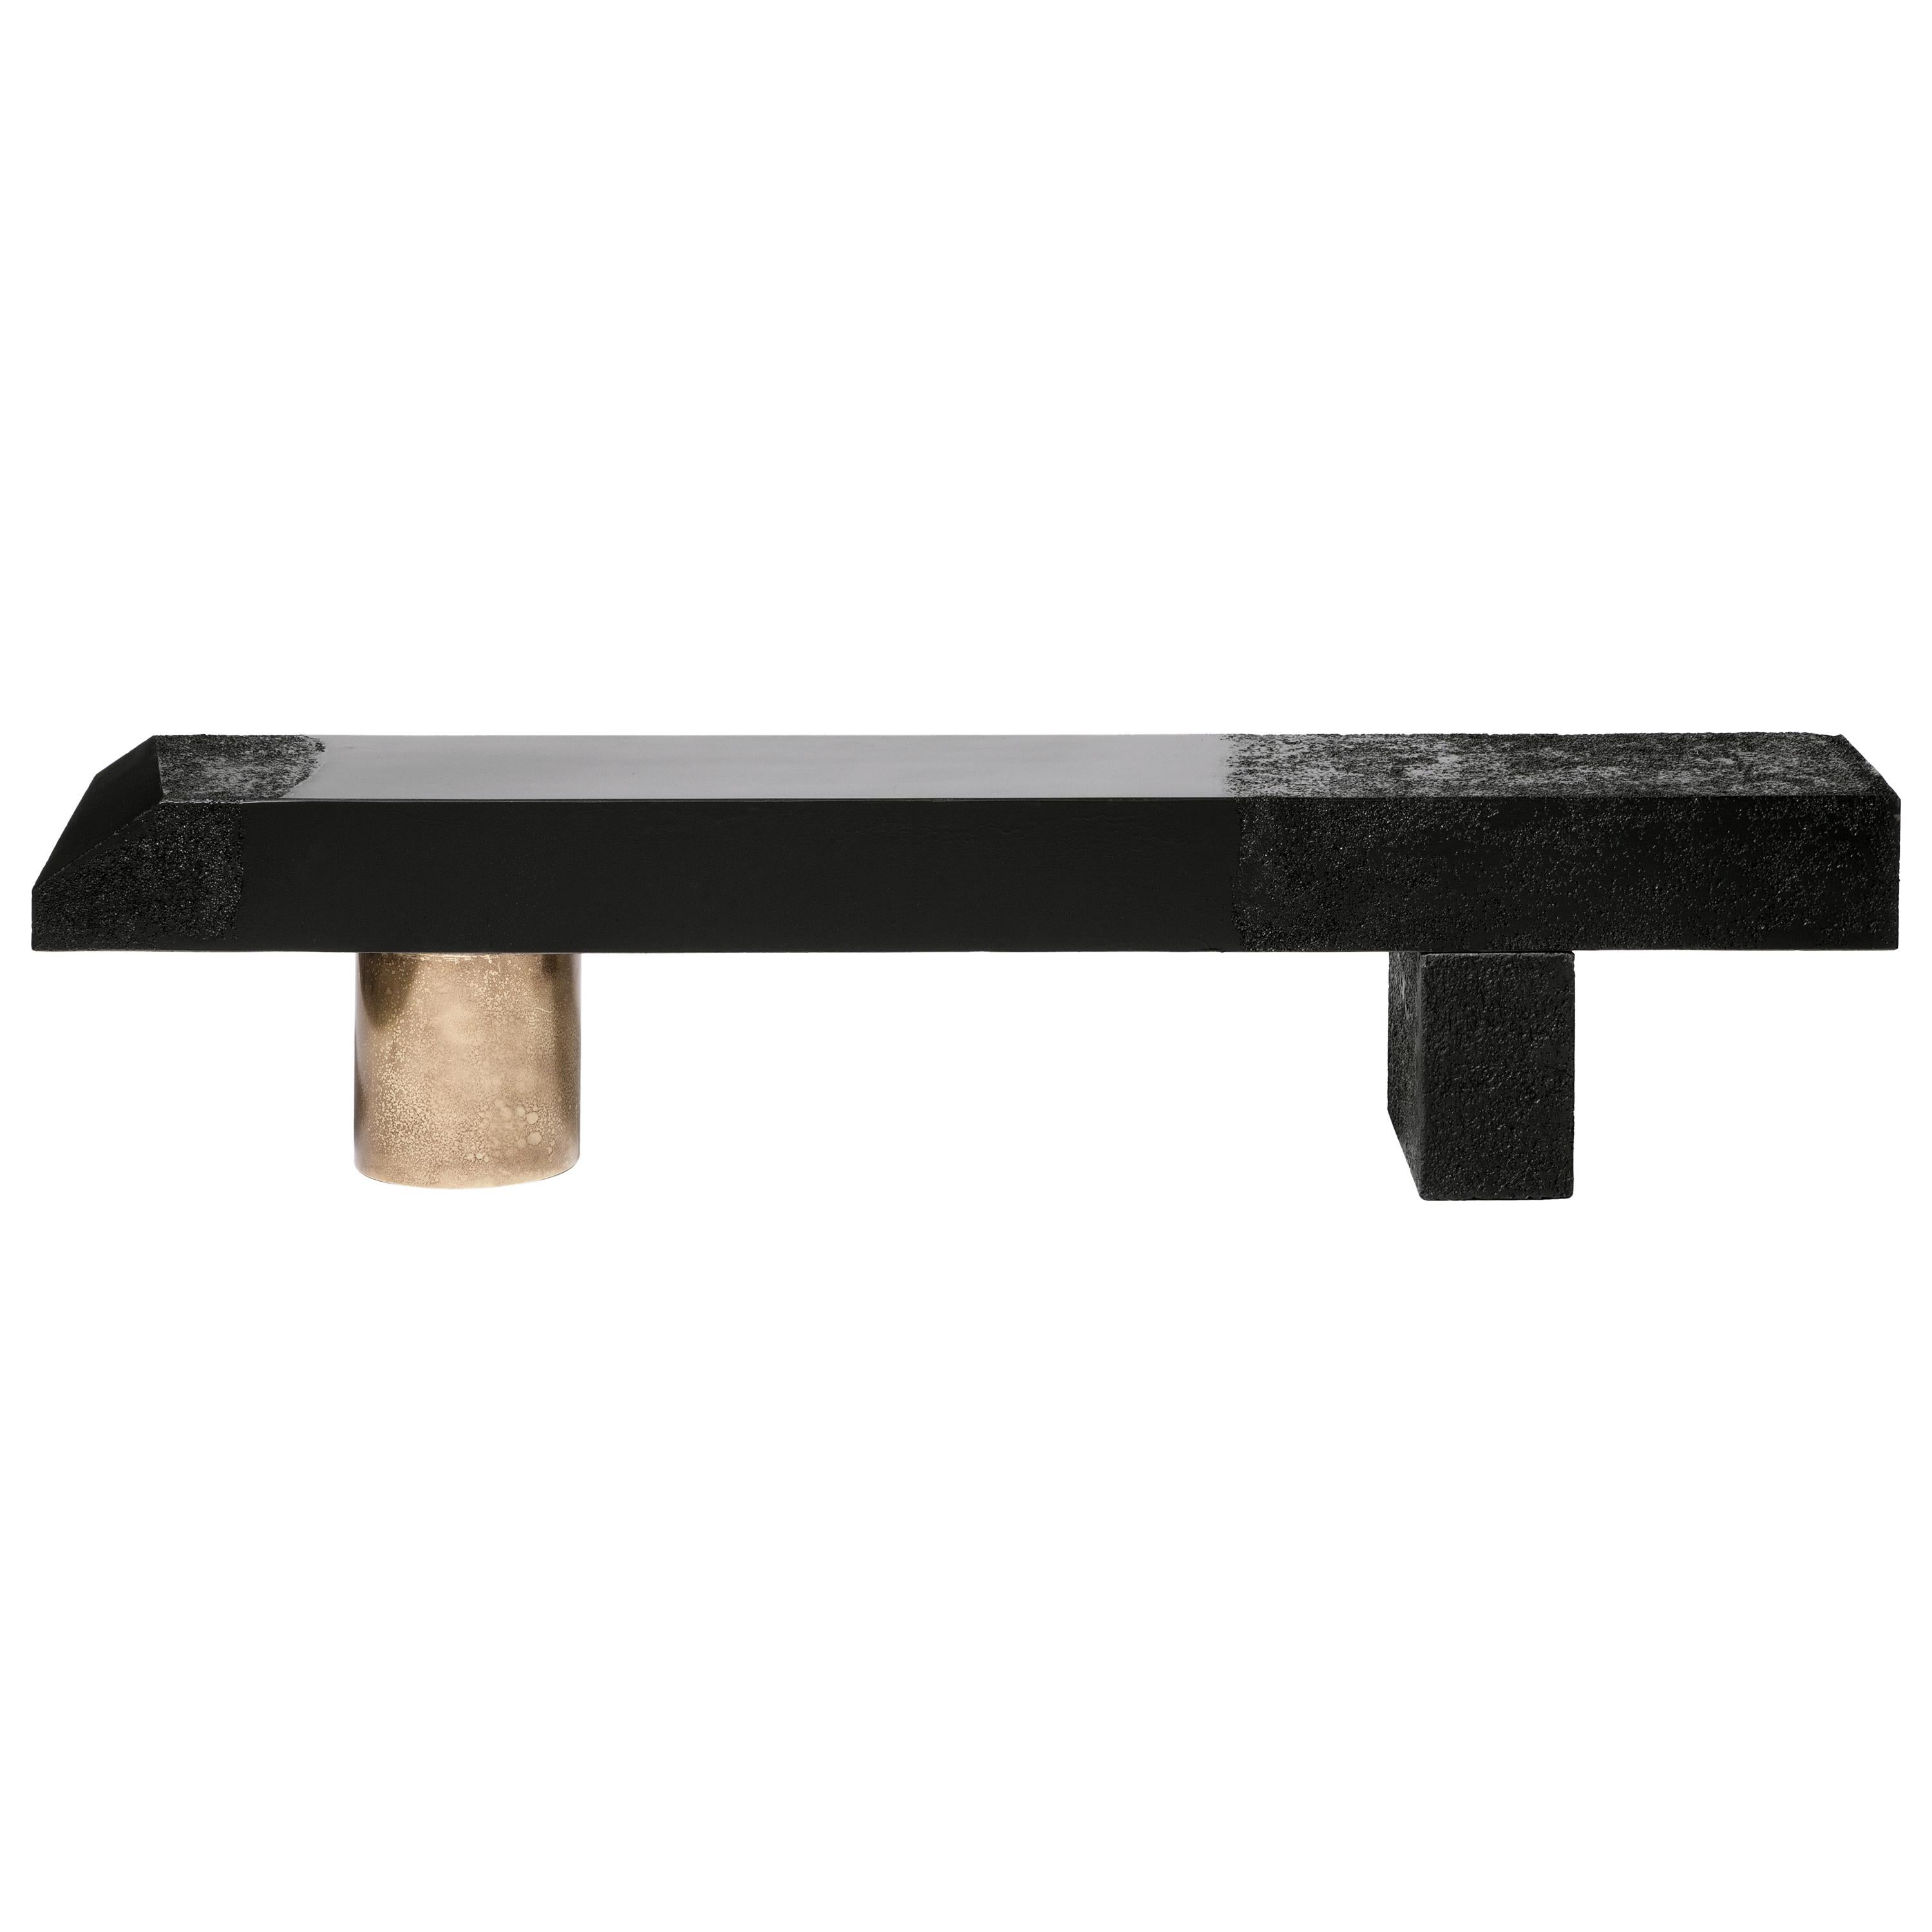 Contemporary Golia Bench by Draga&Aurel Concrete Resin and Brass, 21st Century For Sale